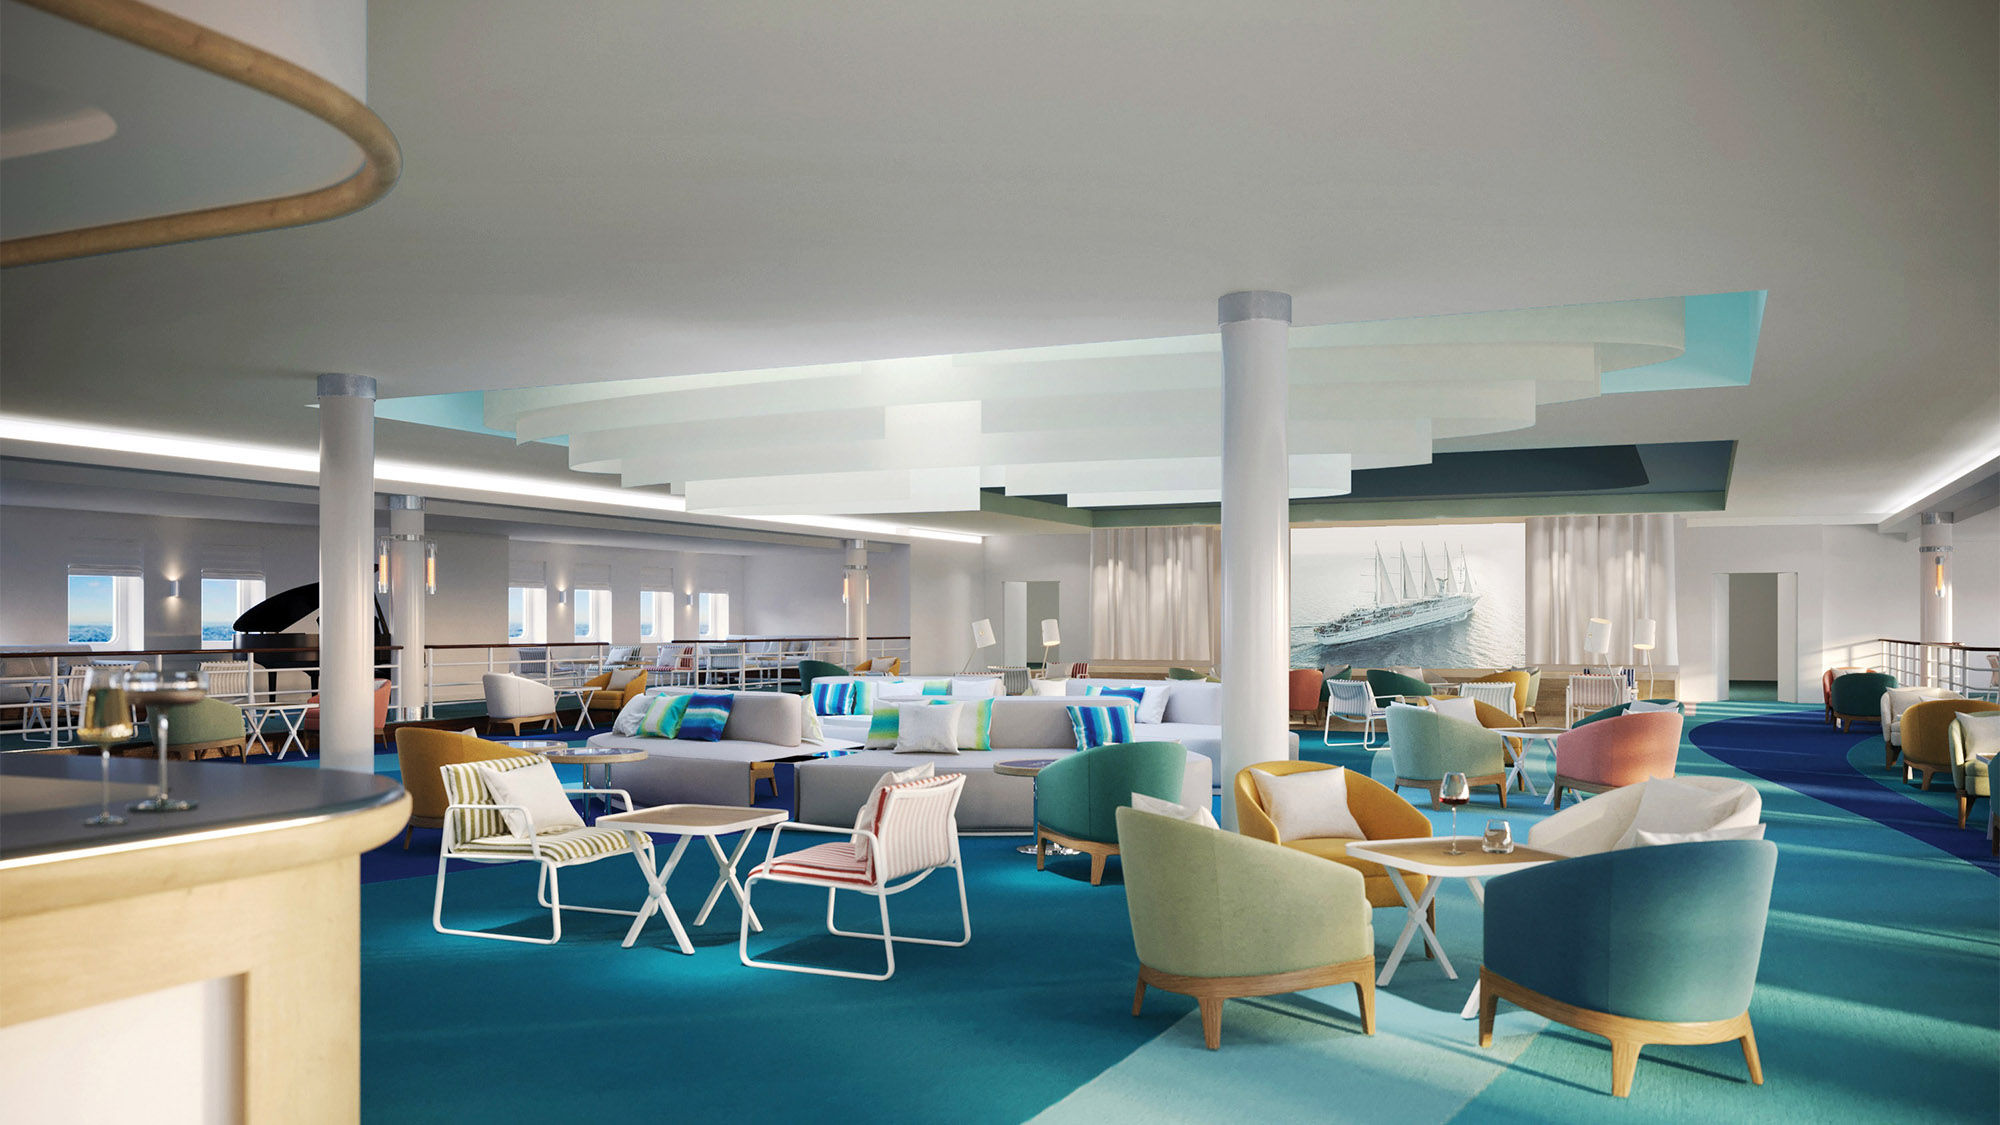 The Club Med 2's Yacht Club lounge was remade with new furniture and fabrics, including a suspended fabric centerpiece inspired by wind in the ship's sails.